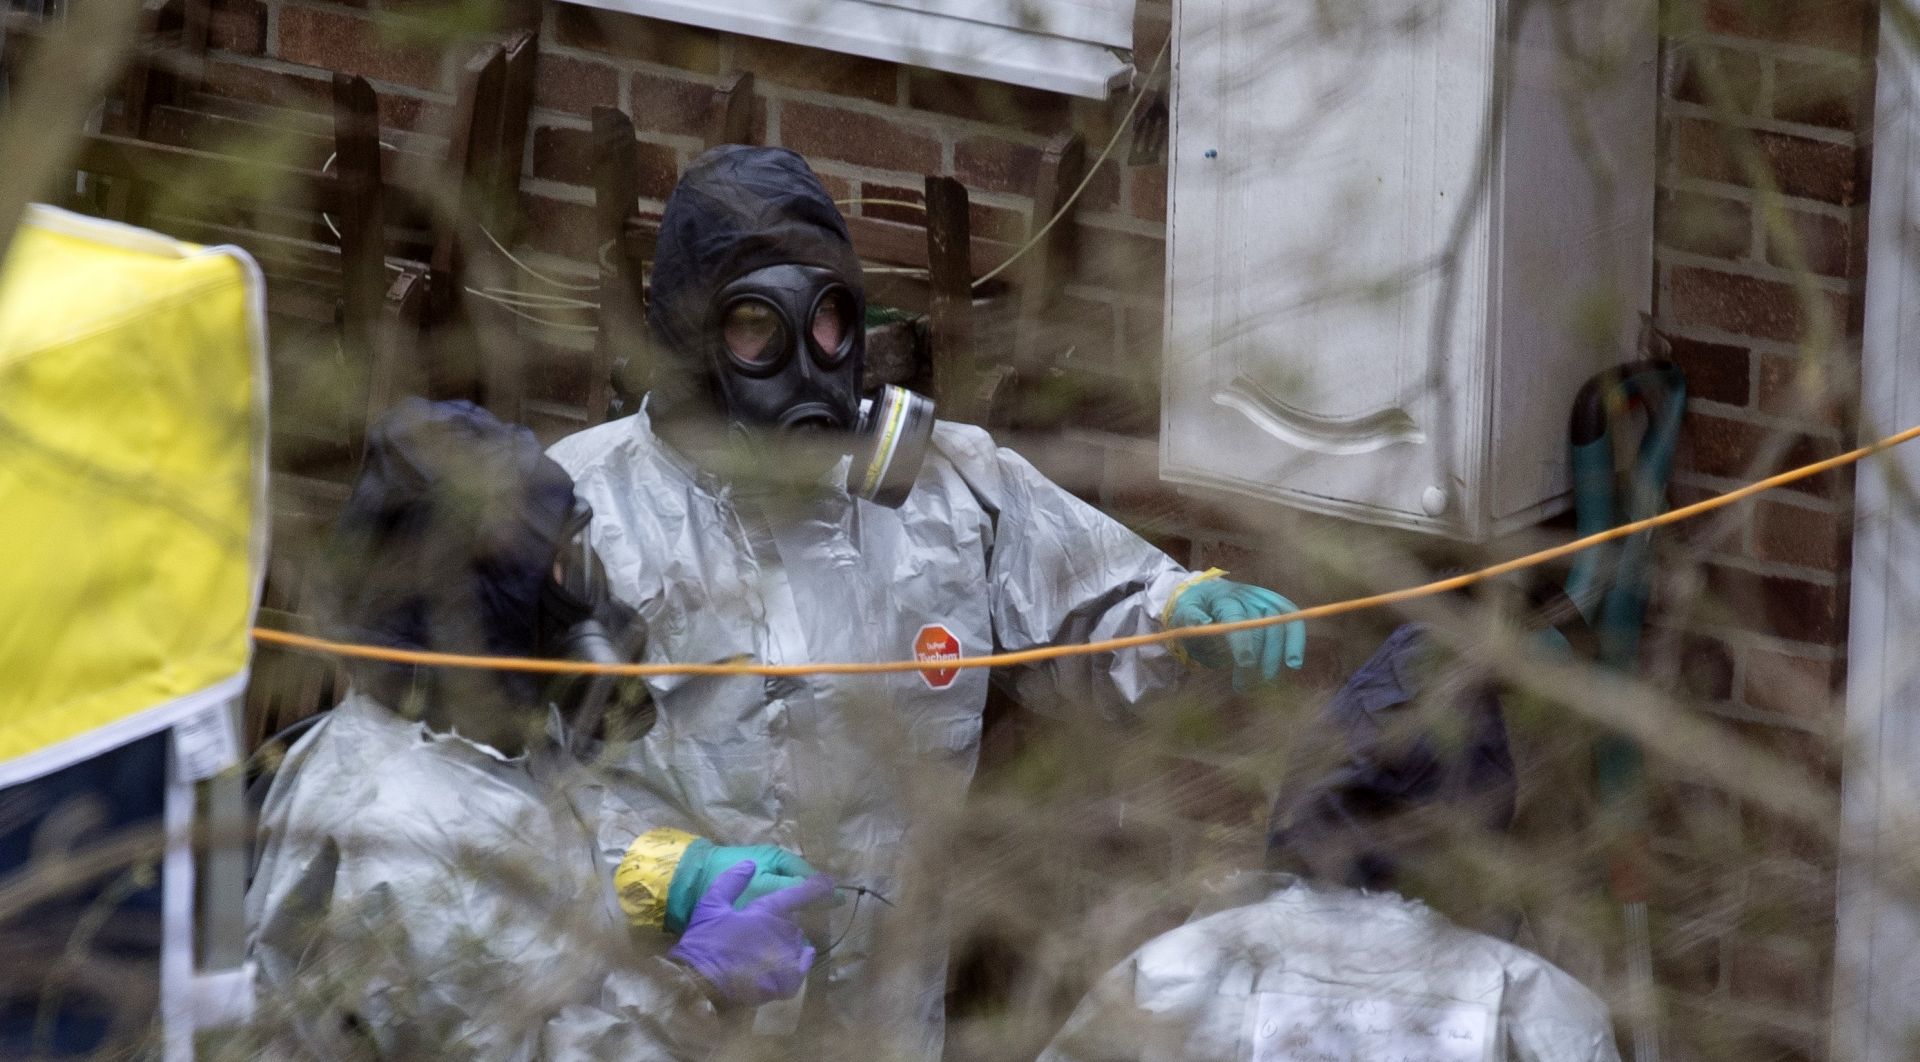 epa06620872 A team believed to be from the Organisation for the Prohibition of Chemical Weapons (OPCW) inspect the back garden of house on the road where former Russian spy Sergei Skripal lived in Salisbury Wiltshire, Britain, 22 March 2018. Skripal and his daughter Yulia were found suffering from extreme exposure to a rare nerve agent in Salisbury on 04 March 2018. Skripal and his daughter Yulia remain in a 'very serious' condition.  EPA/WILL OLIVER